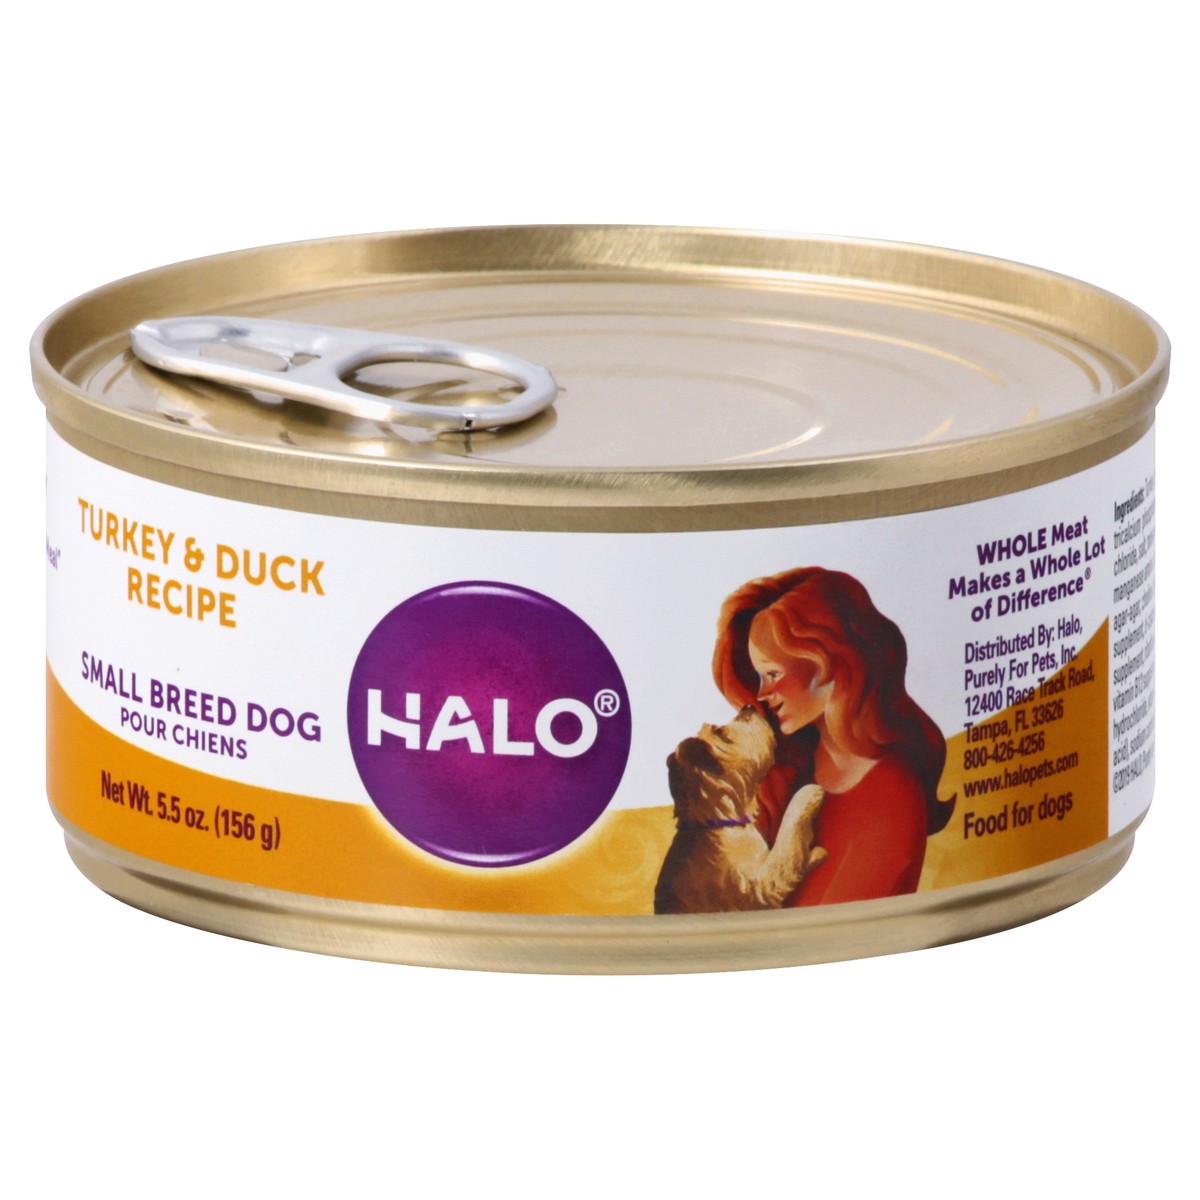 slide 1 of 9, Halo Small Breed Dog Turkey & Duck Recipe Food for Dogs 5.5 oz, 5.5 oz